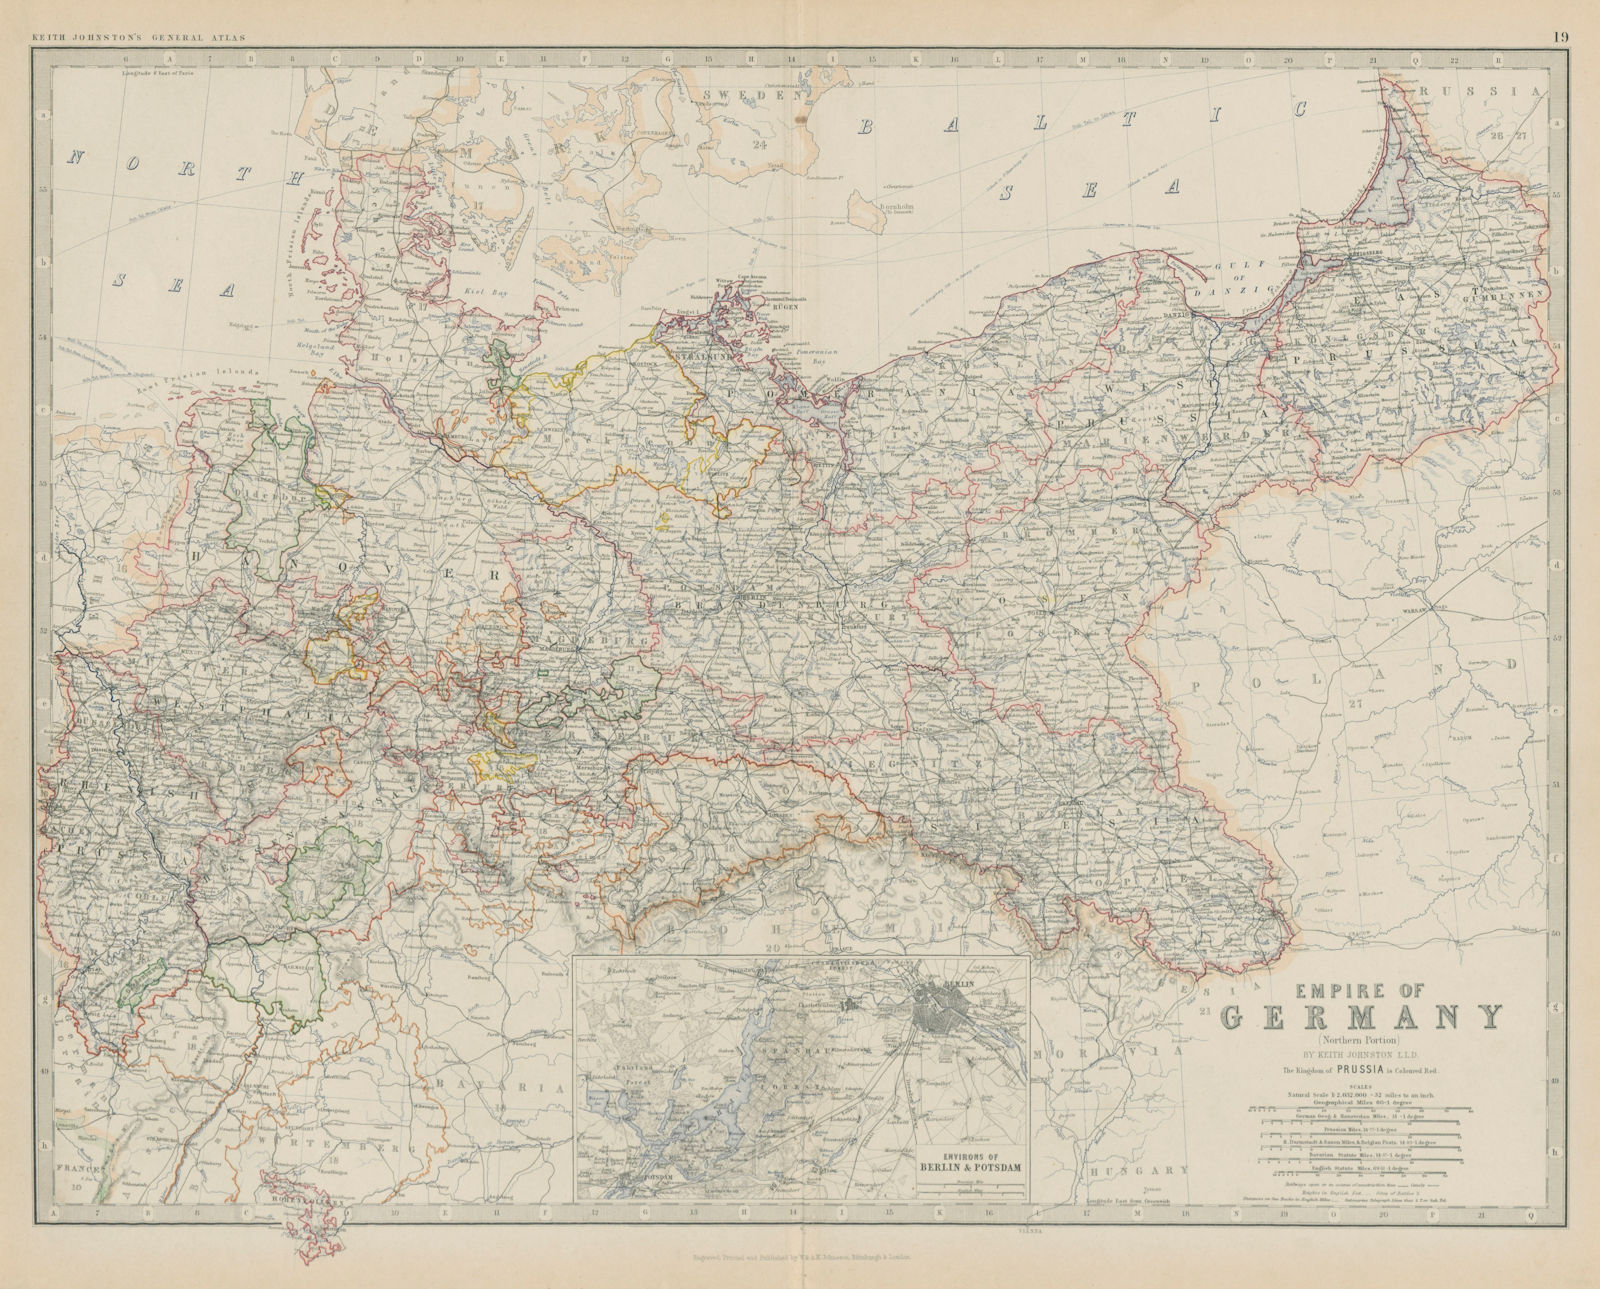 Associate Product Empire of Germany (North). Berlin environs. Prussia. 50x60cm. JOHNSTON 1879 map